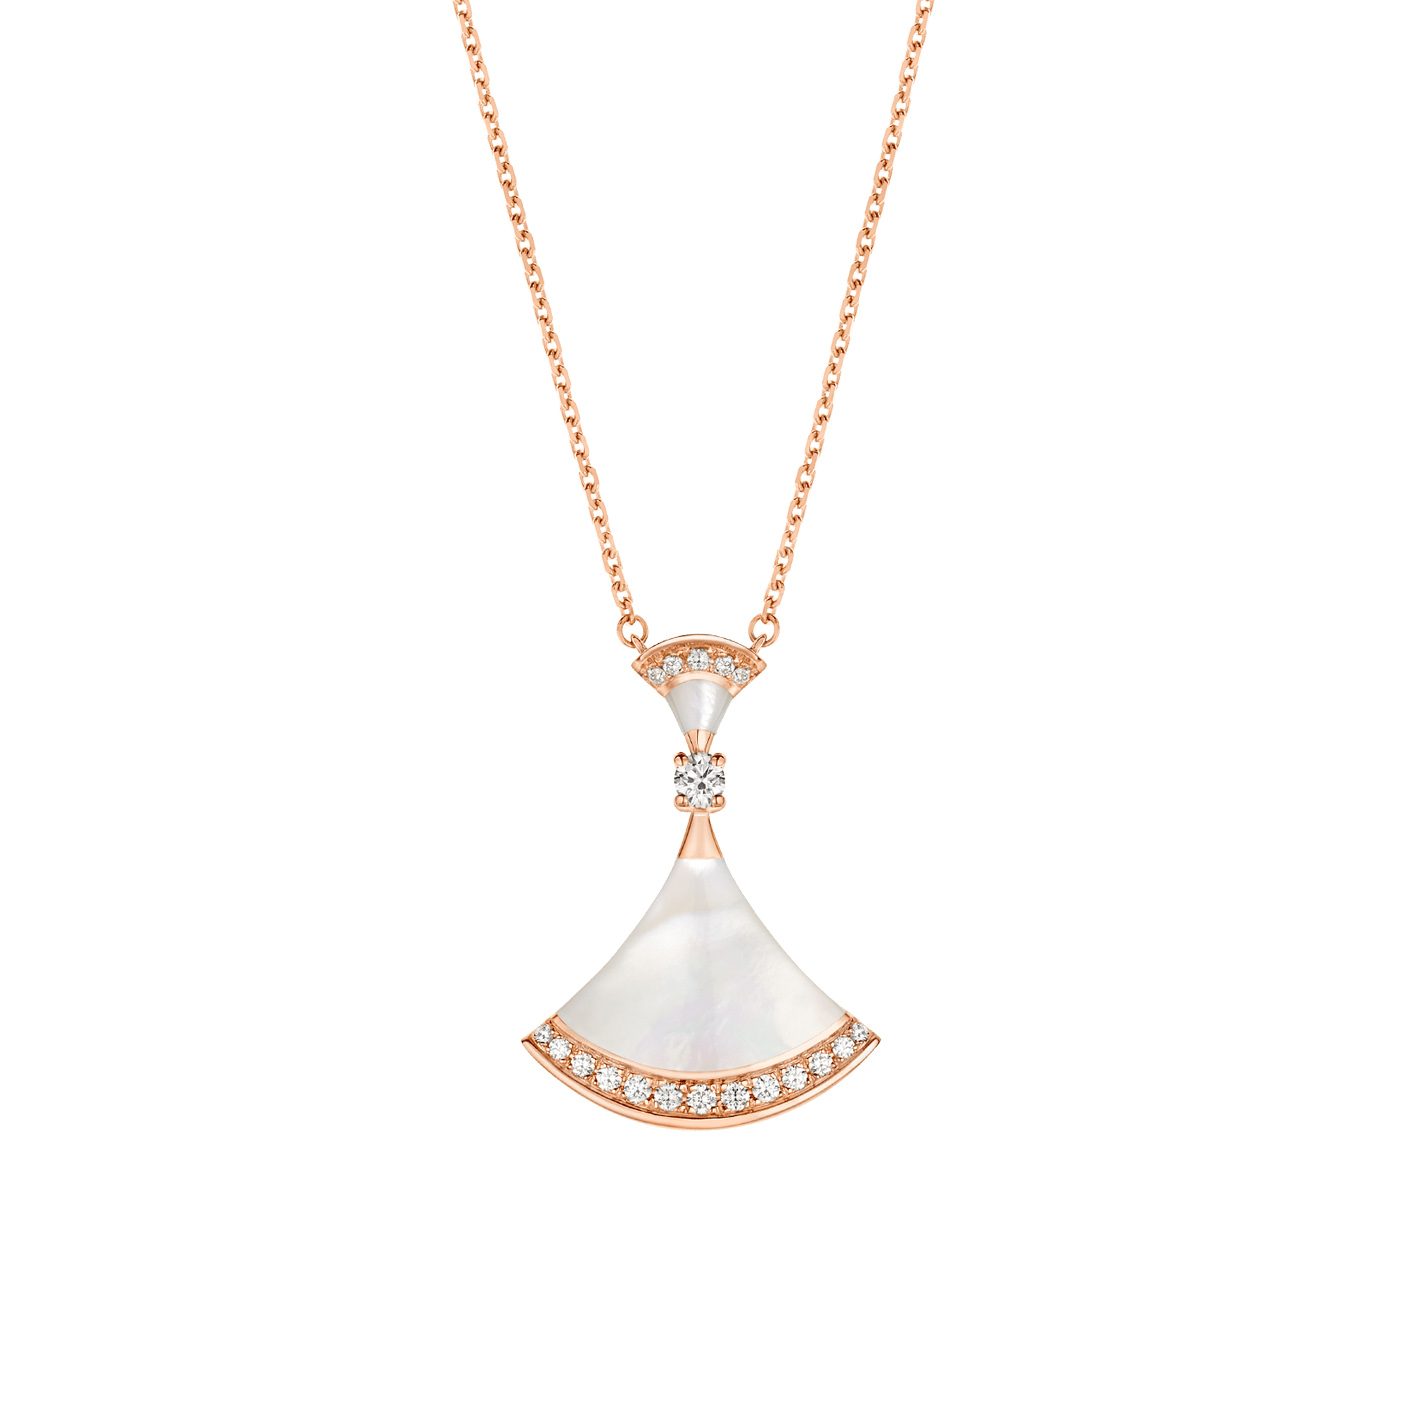 Wholesale OEM ODM 18 kt rose gold OEM/ODM Jewelry necklace set with mother of pearl elements, a round brilliant-cut diamond and pavé diamonds Custom design jewelry Suppliers